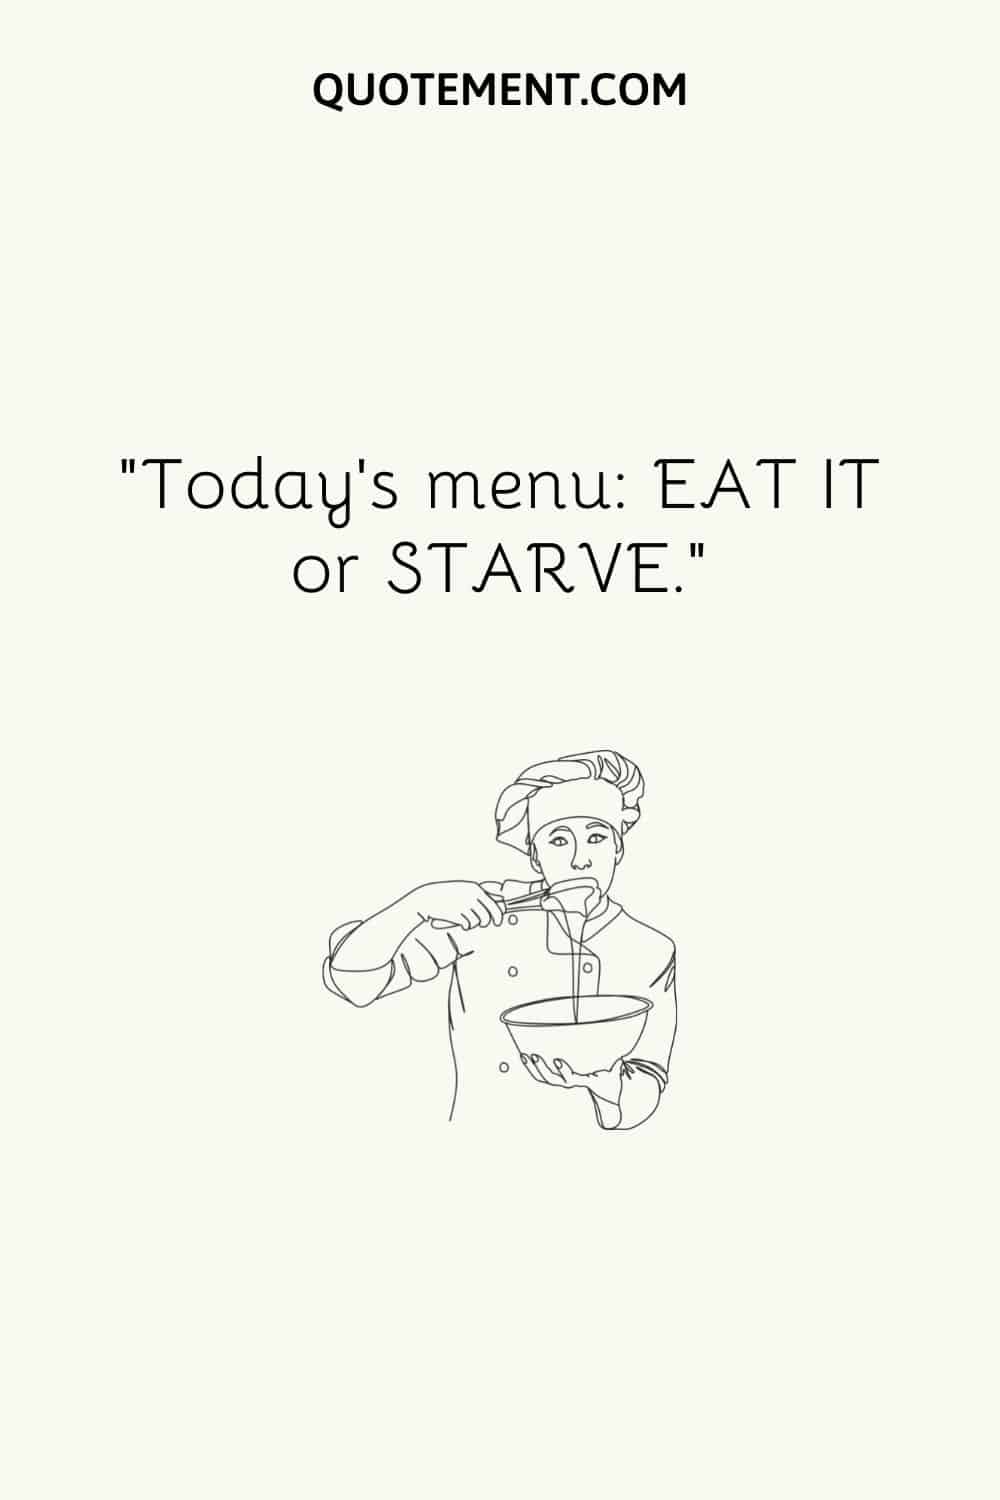 Today’s menu EAT IT or STARVE.